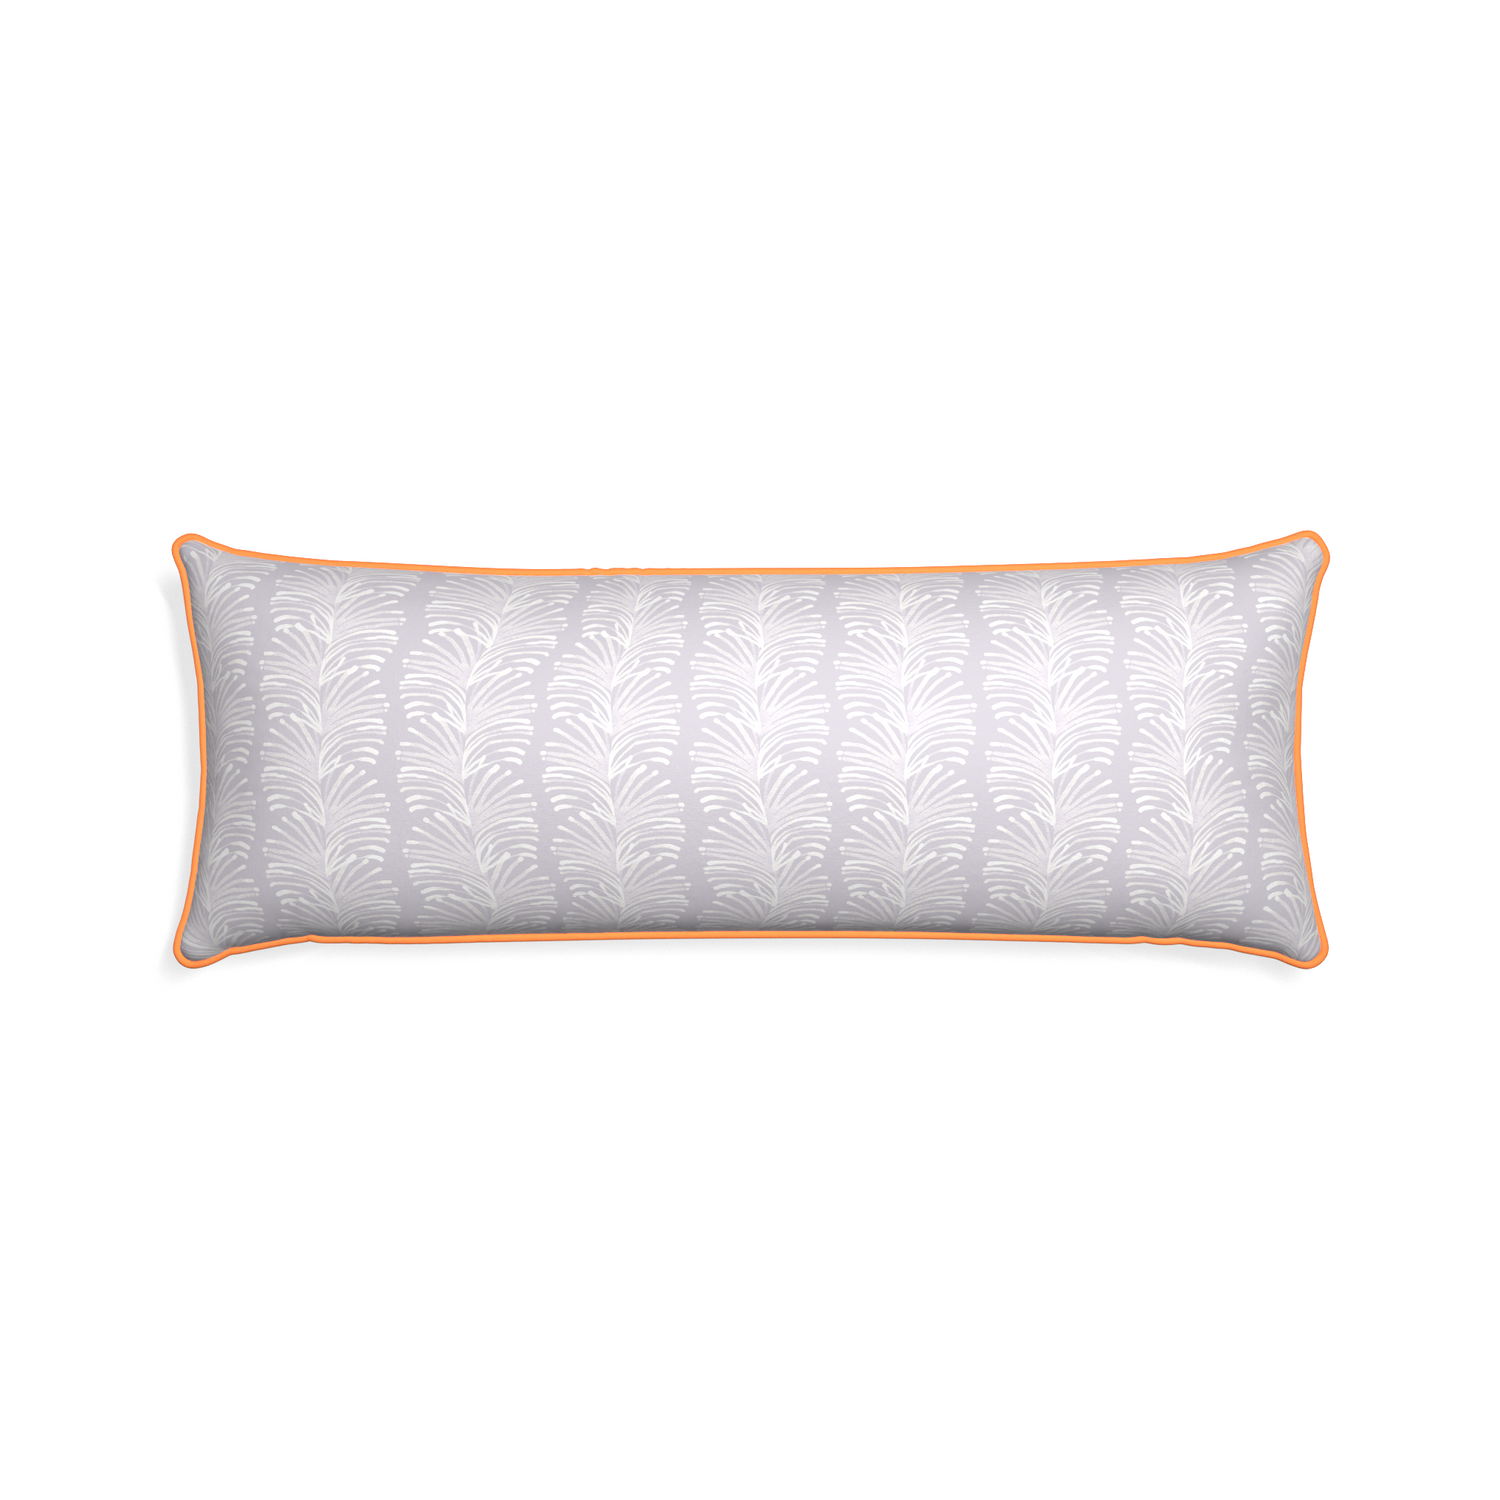 Xl-lumbar emma lavender custom lavender botanical stripepillow with clementine piping on white background